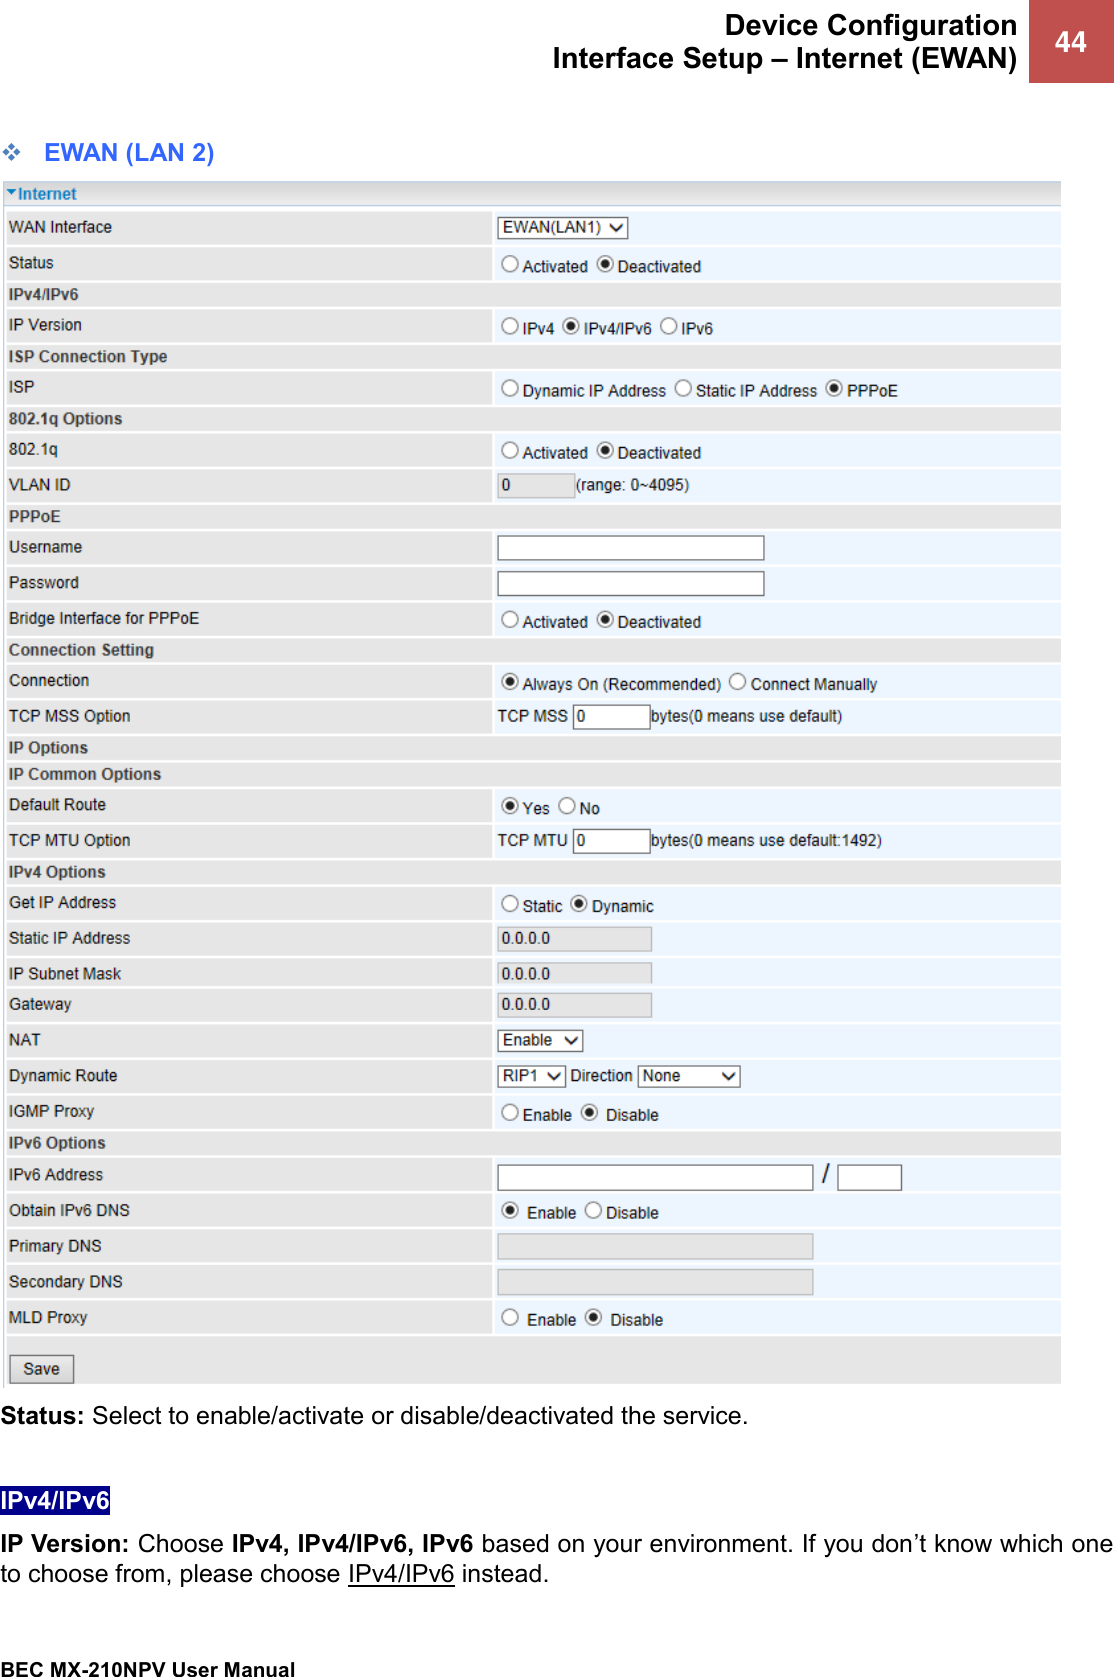 Device Configuration Interface Setup – Internet (EWAN) 44   BEC MX-210NPV User Manual  ❖ EWAN (LAN 2)  Status: Select to enable/activate or disable/deactivated the service.  IPv4/IPv6 IP Version: Choose IPv4, IPv4/IPv6, IPv6 based on your environment. If you don’t know which one to choose from, please choose IPv4/IPv6 instead. 